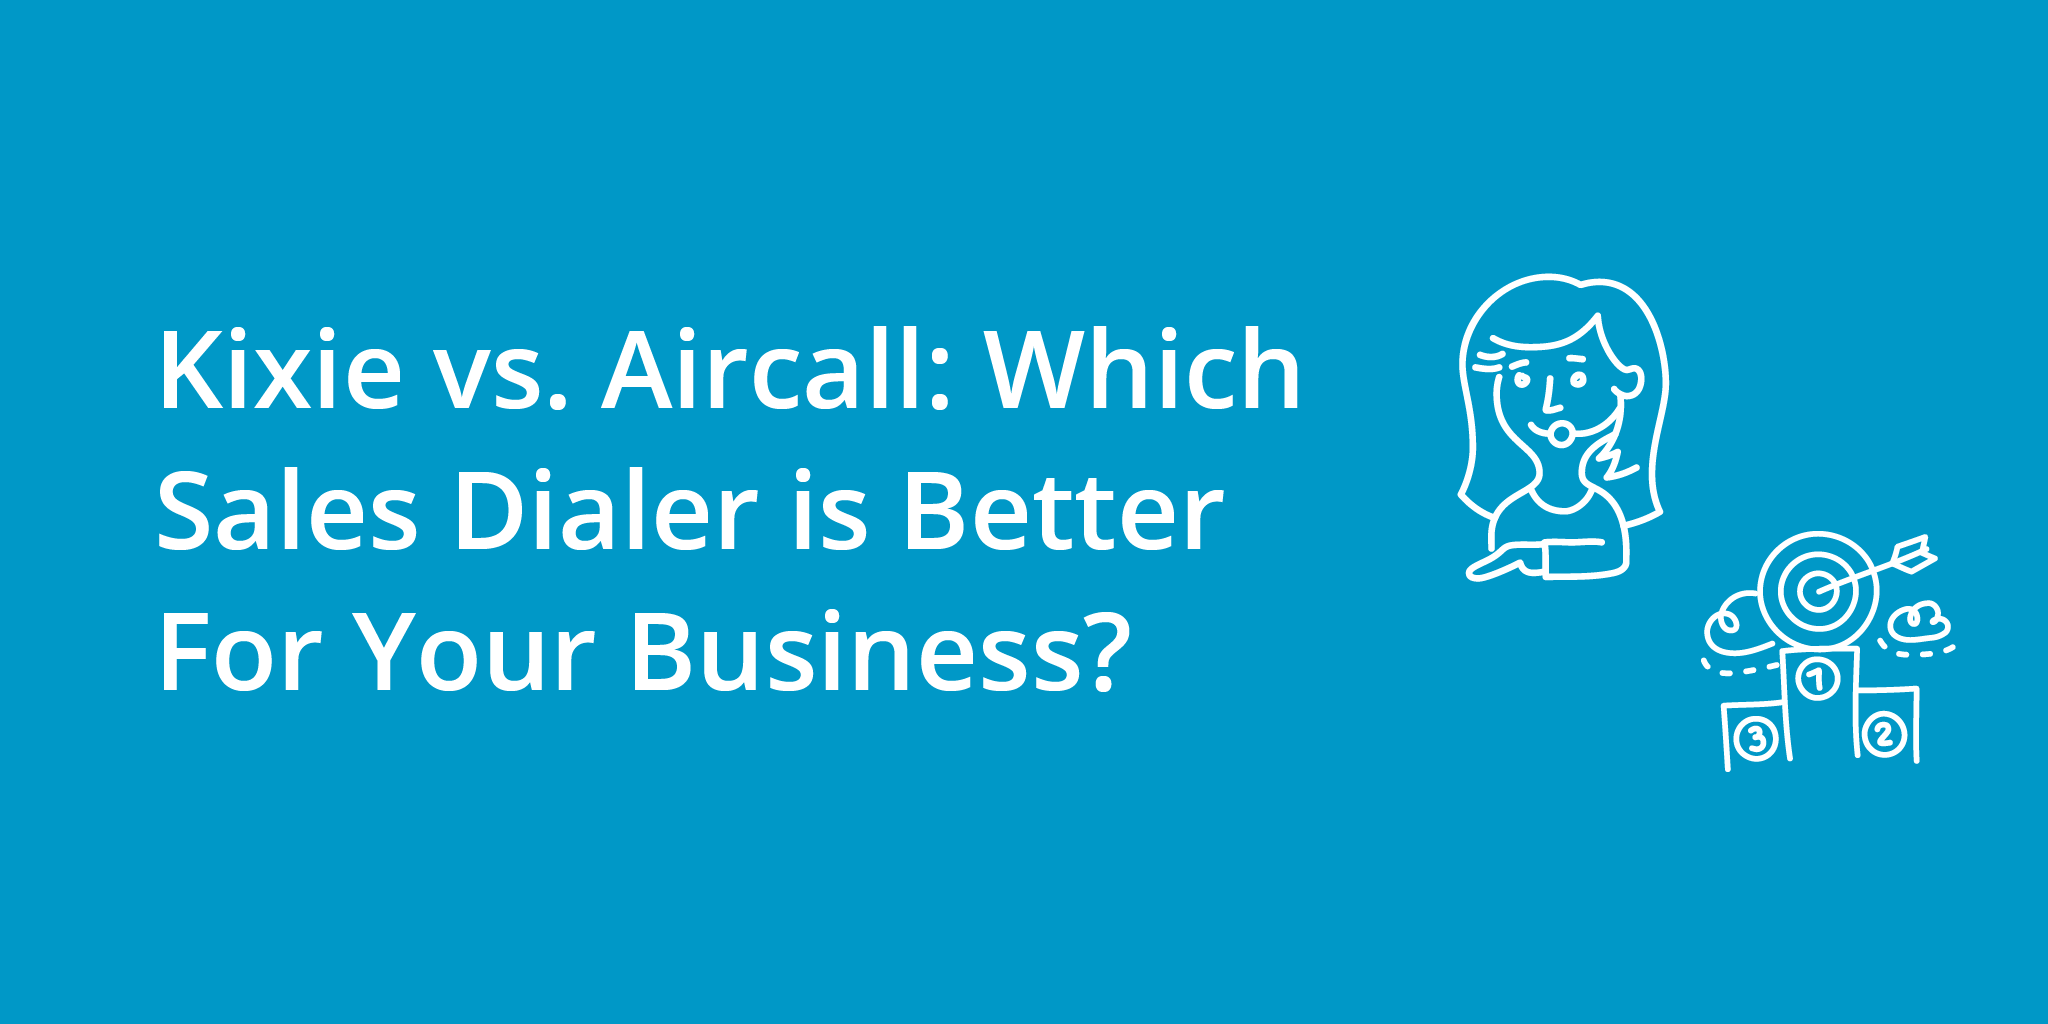 Kixie vs. Aircall: Which Sales Dialer is Better For Your Business? | Telephones for business